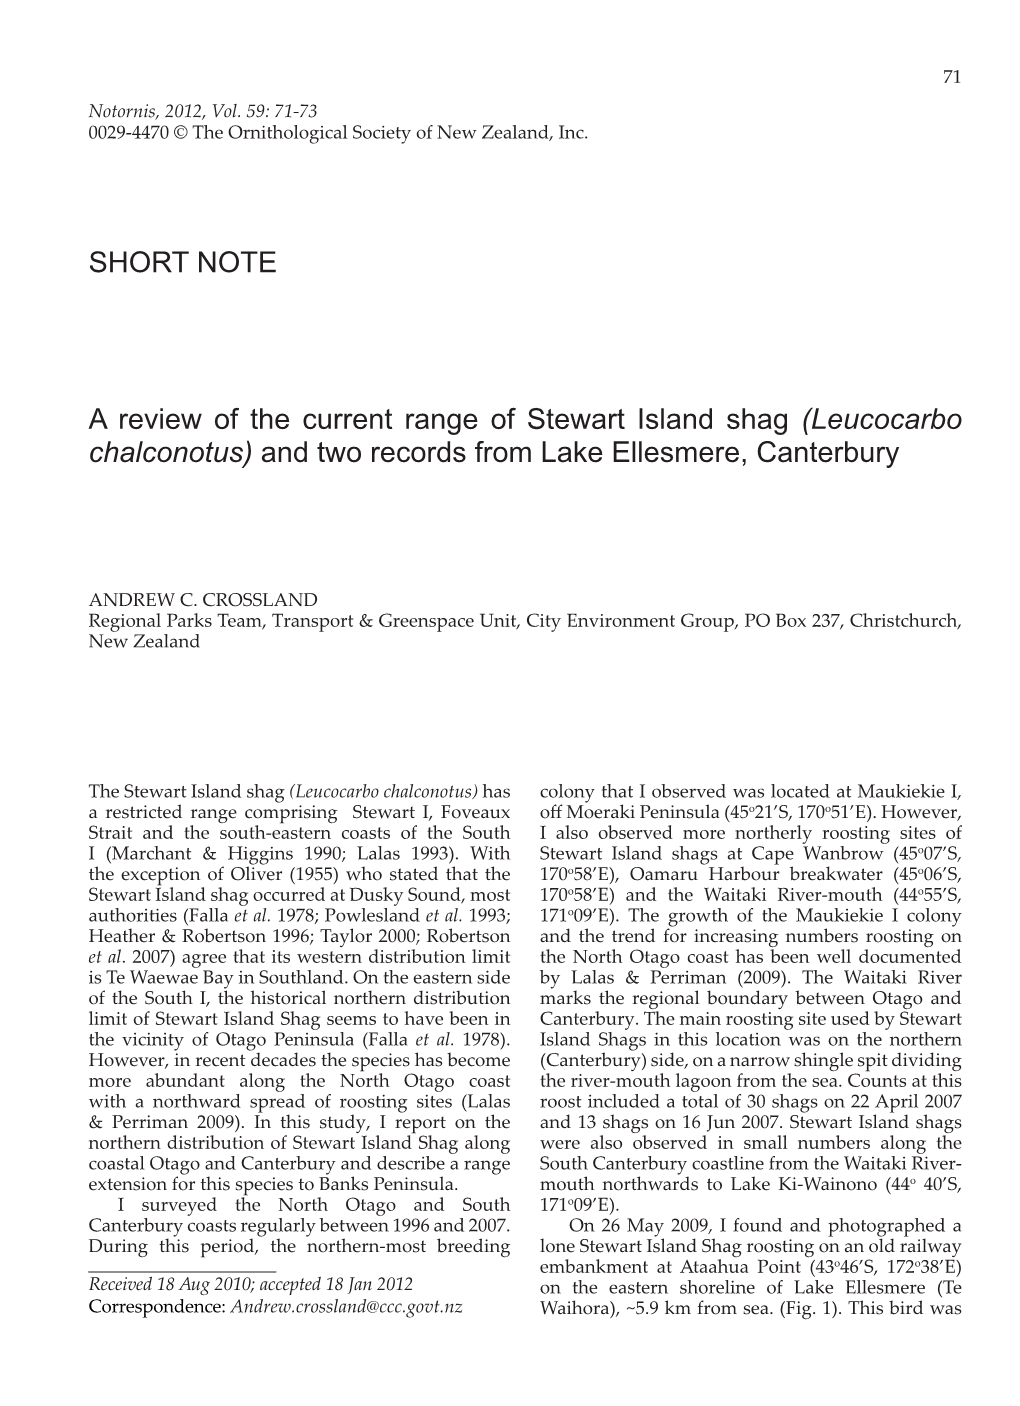 SHORT NOTE a Review of the Current Range of Stewart Island